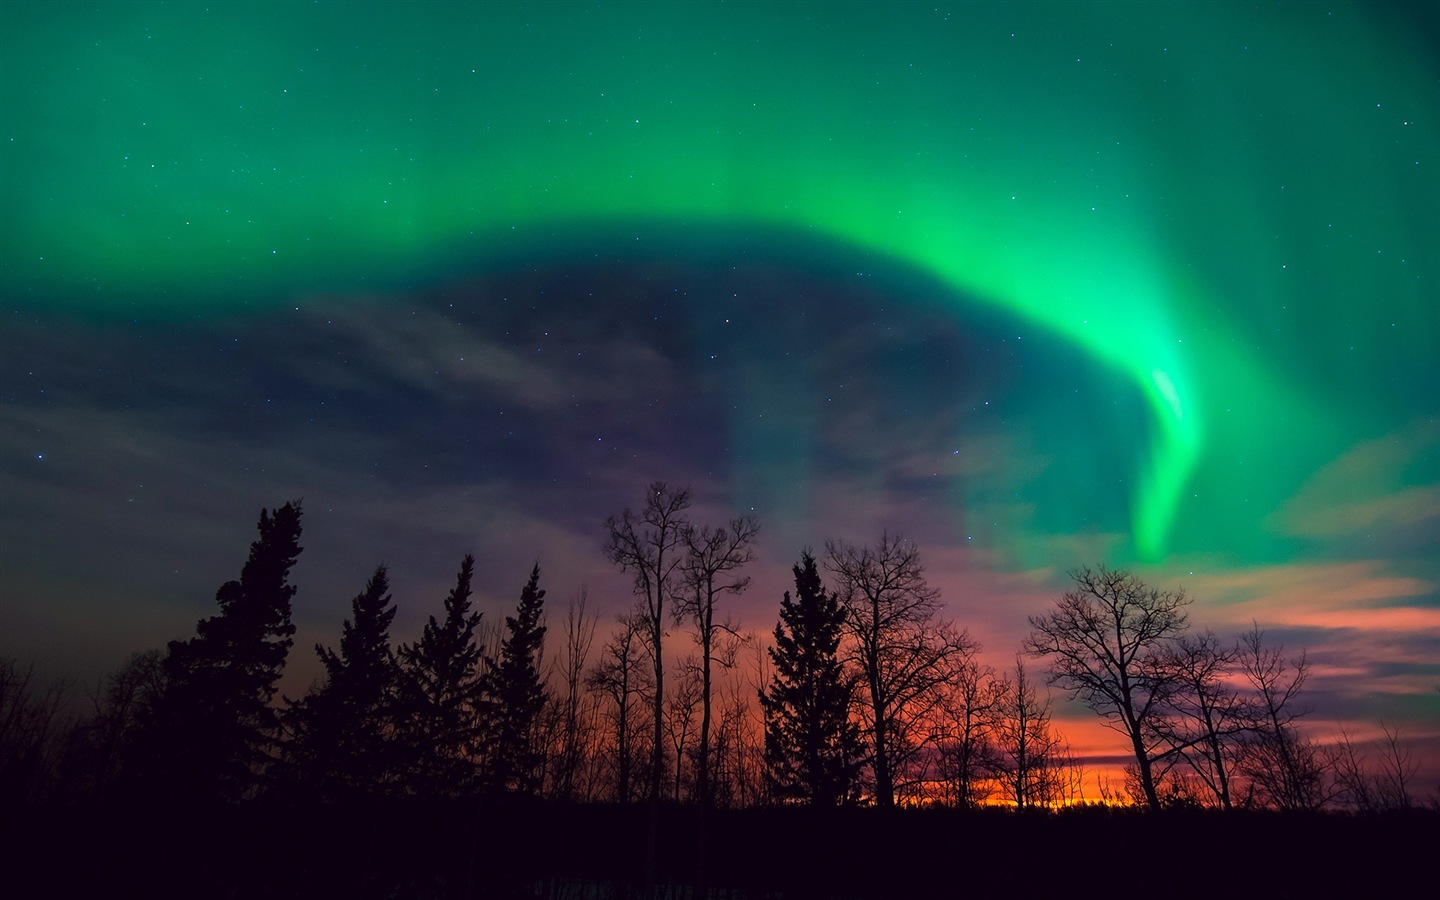 Natural wonders of the Northern Lights HD Wallpaper (1) #19 - 1440x900